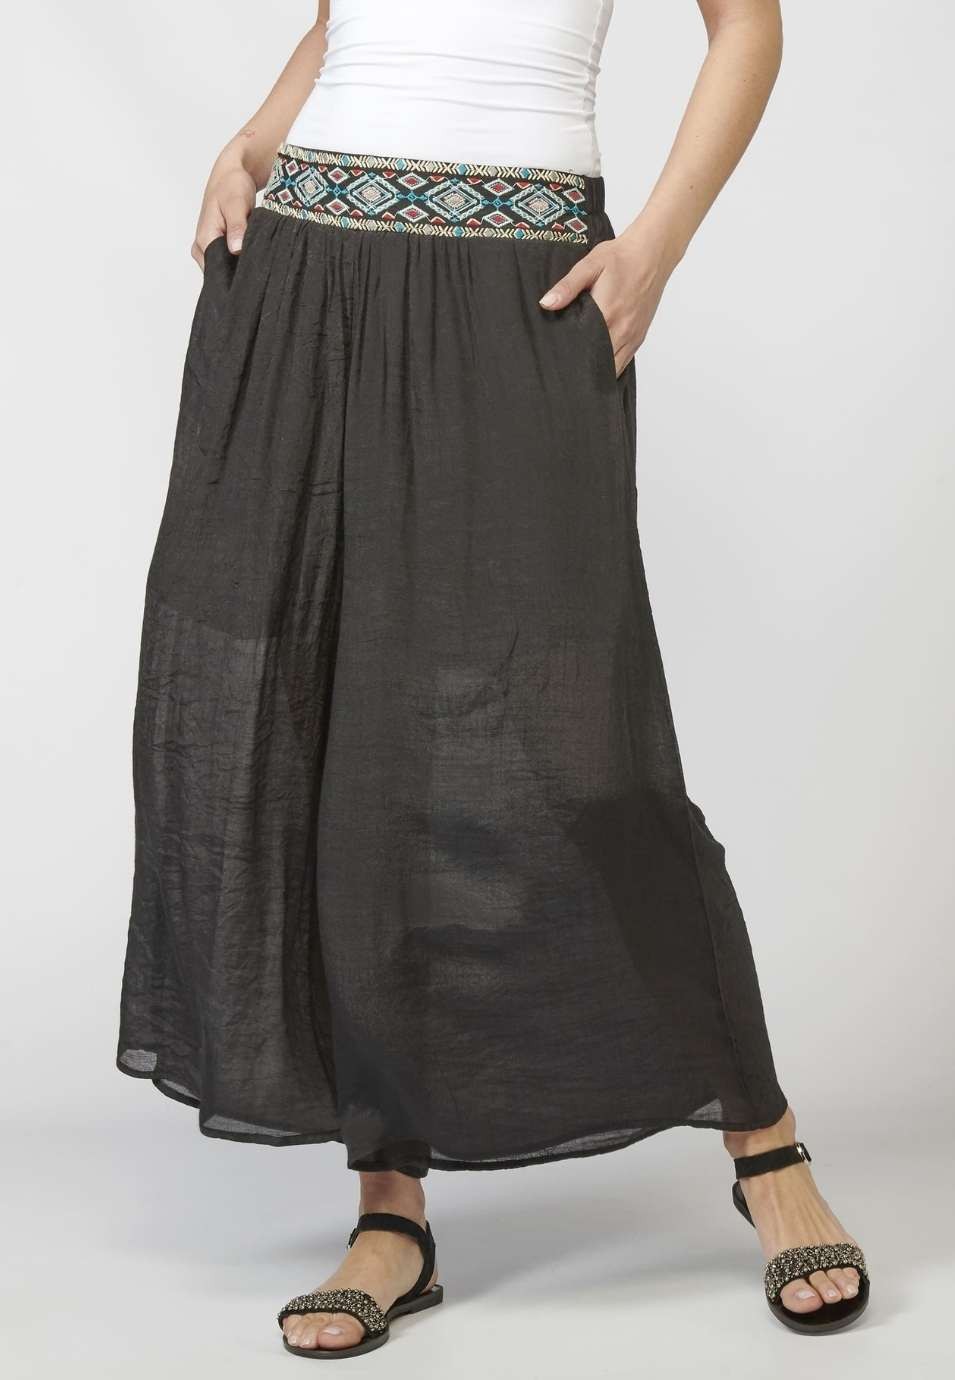 Women's long elastic trousers with sash and Ethnic Embroidered Detail in Black color 4